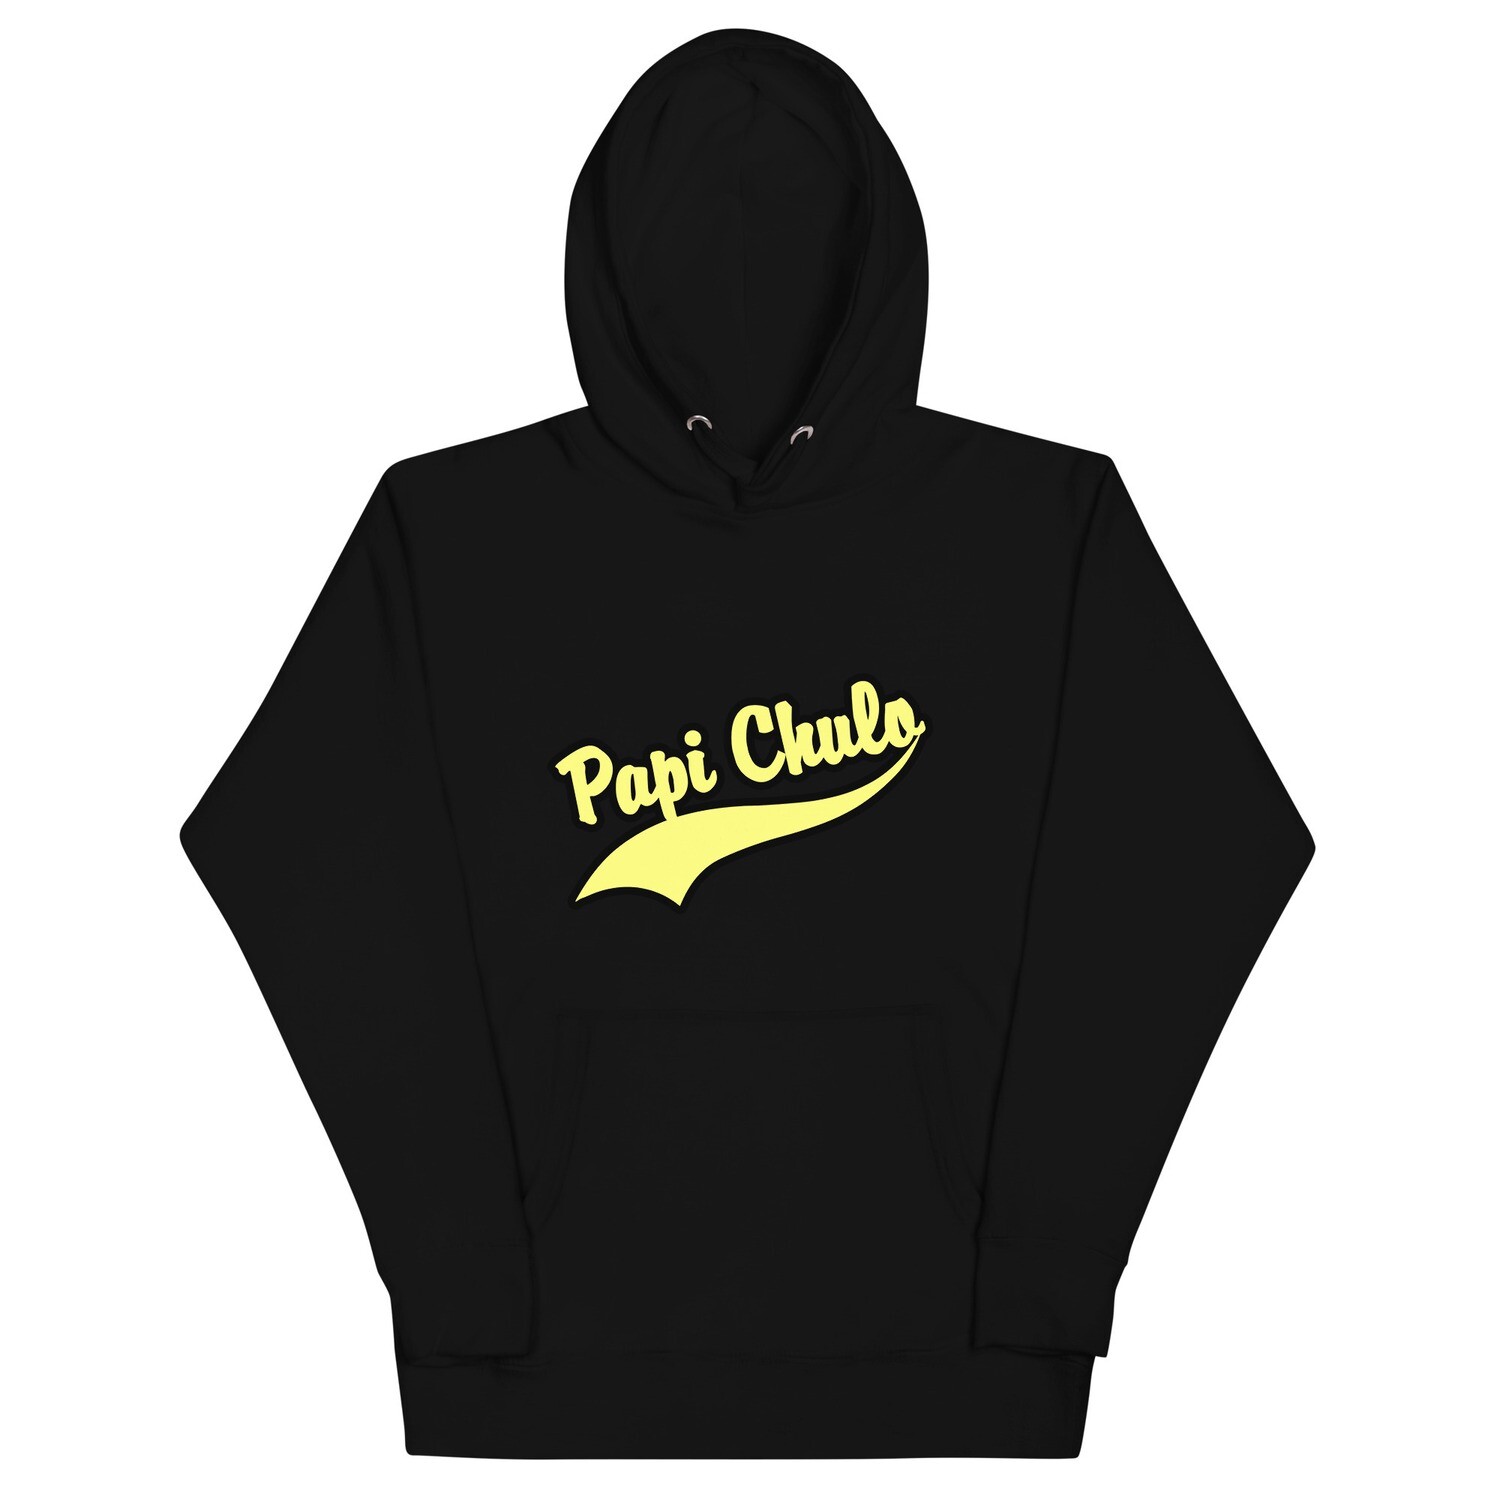 The Papi Chulo Unisex Hoodie